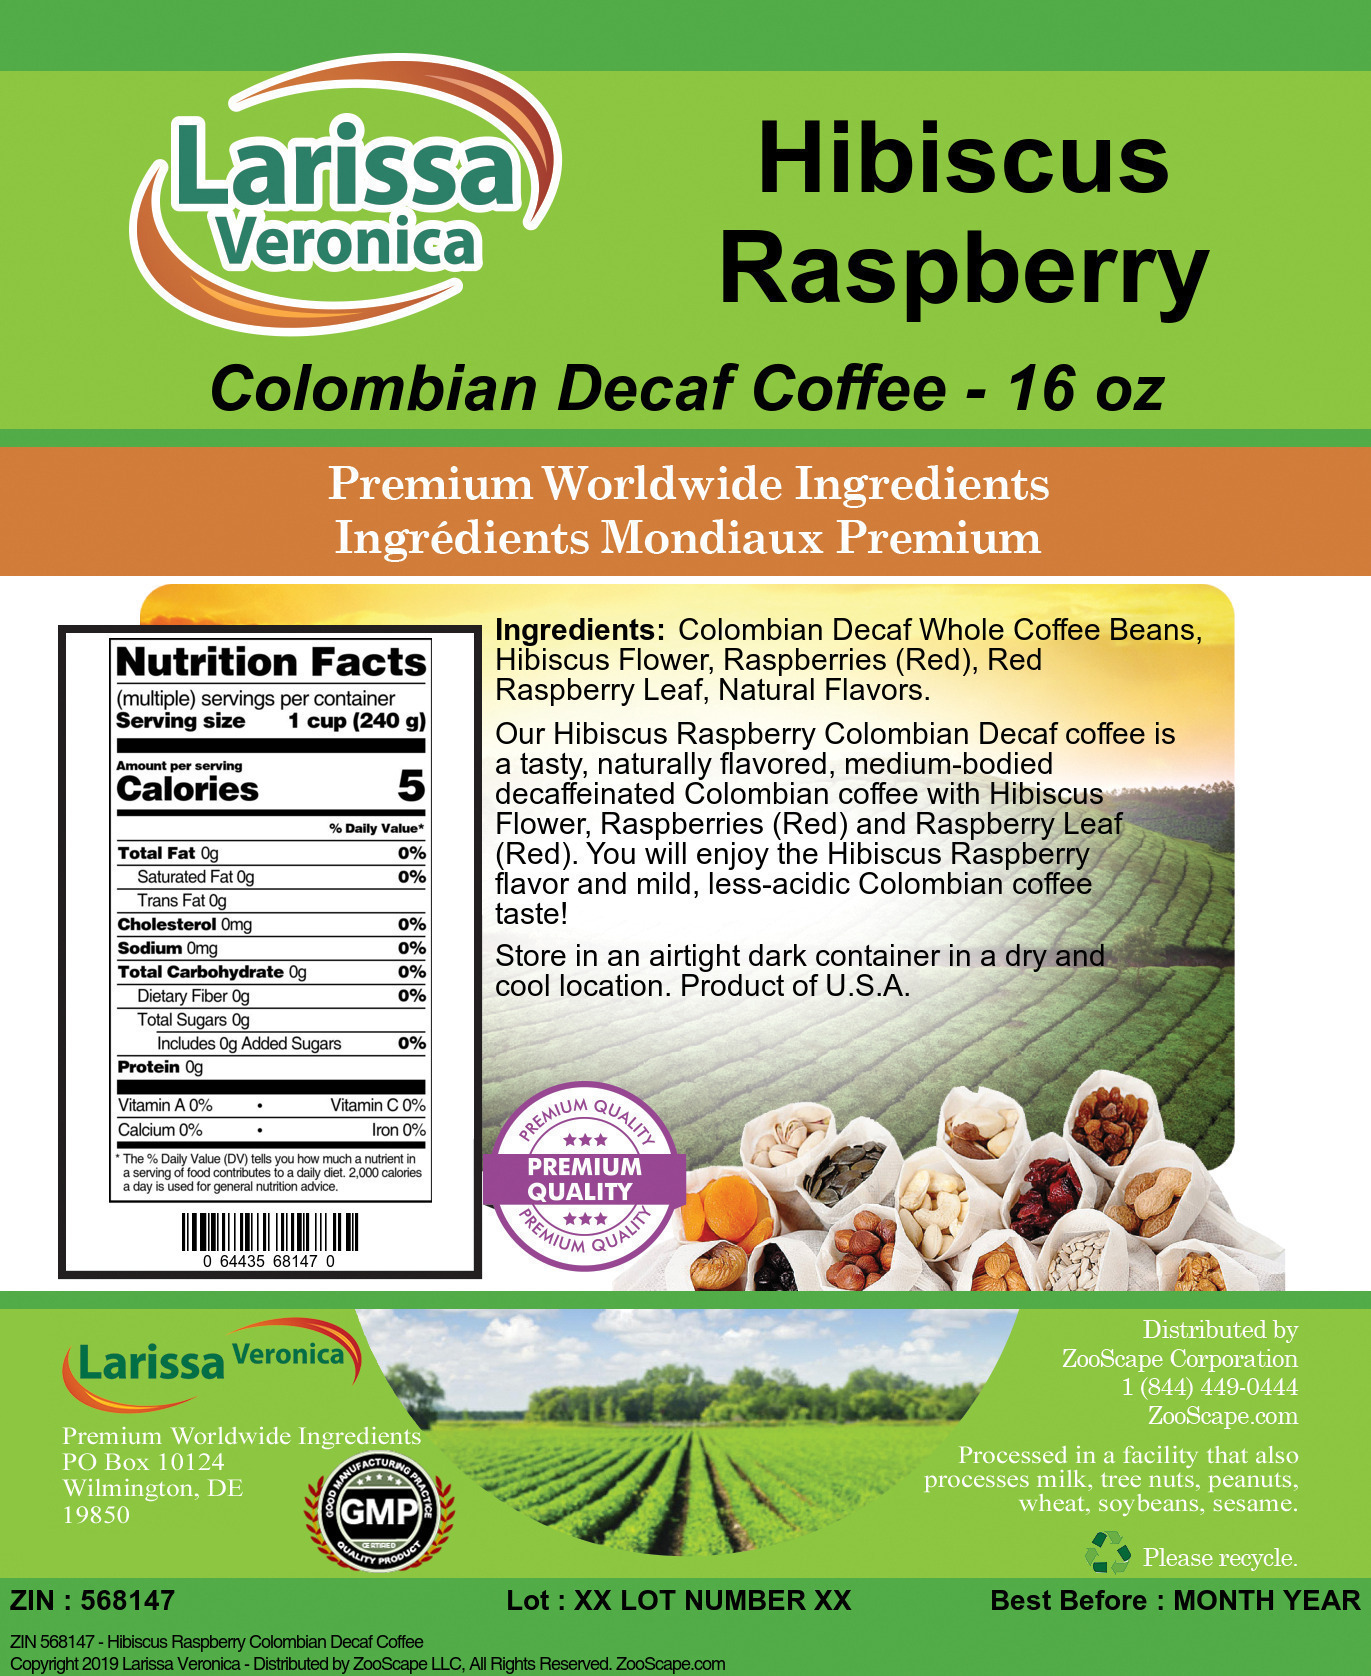 Hibiscus Raspberry Colombian Decaf Coffee - Label